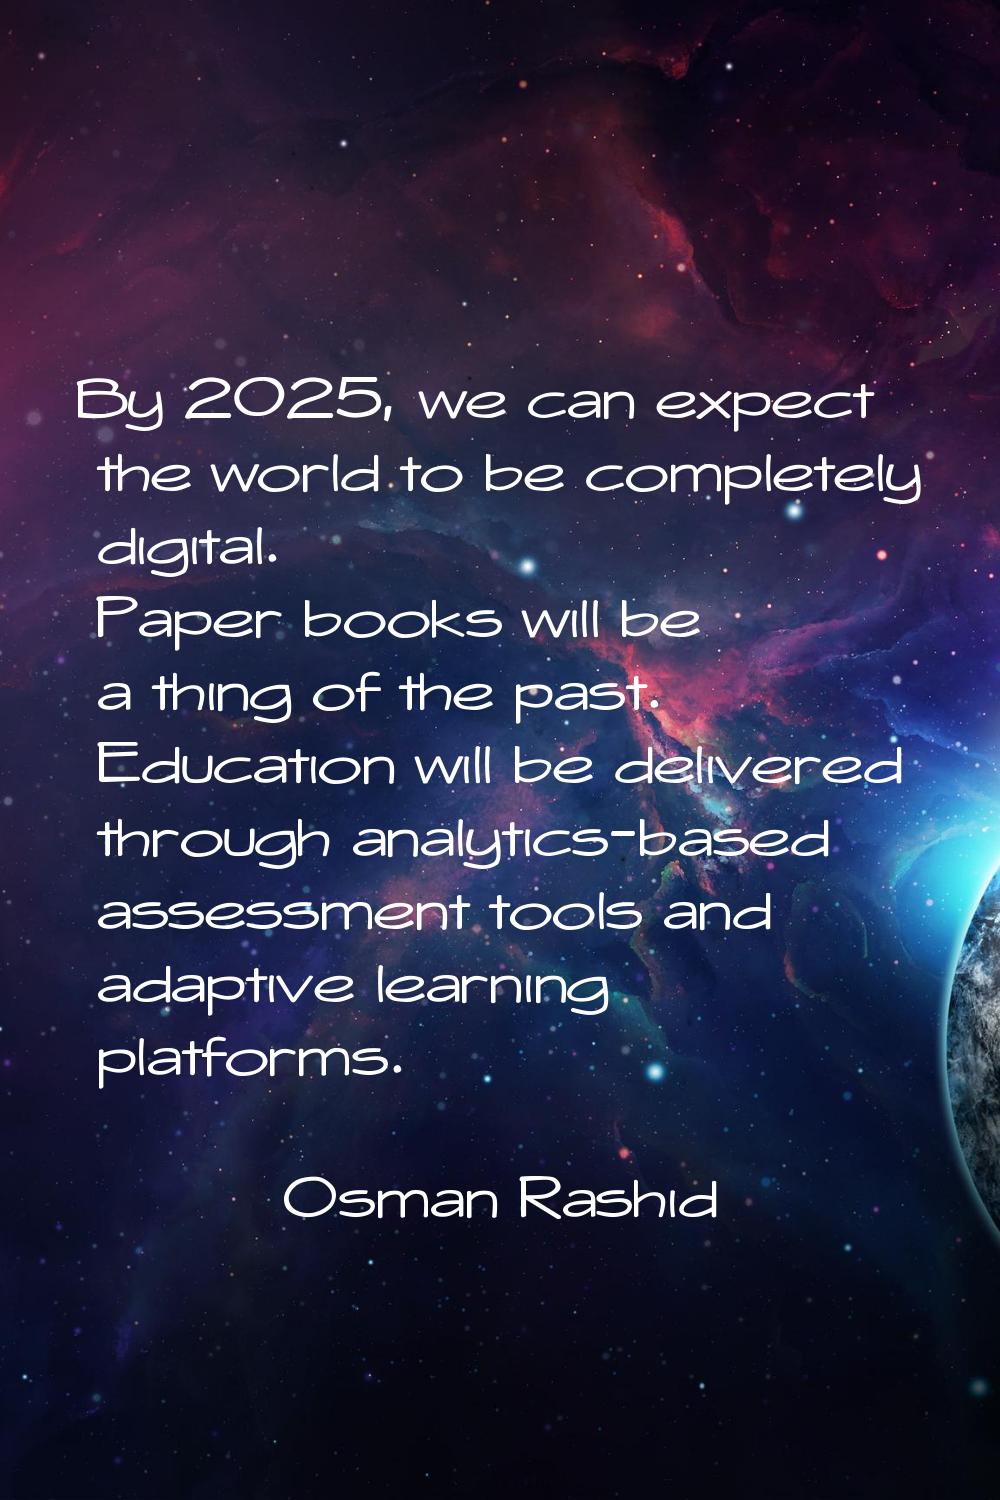 By 2025, we can expect the world to be completely digital. Paper books will be a thing of the past.